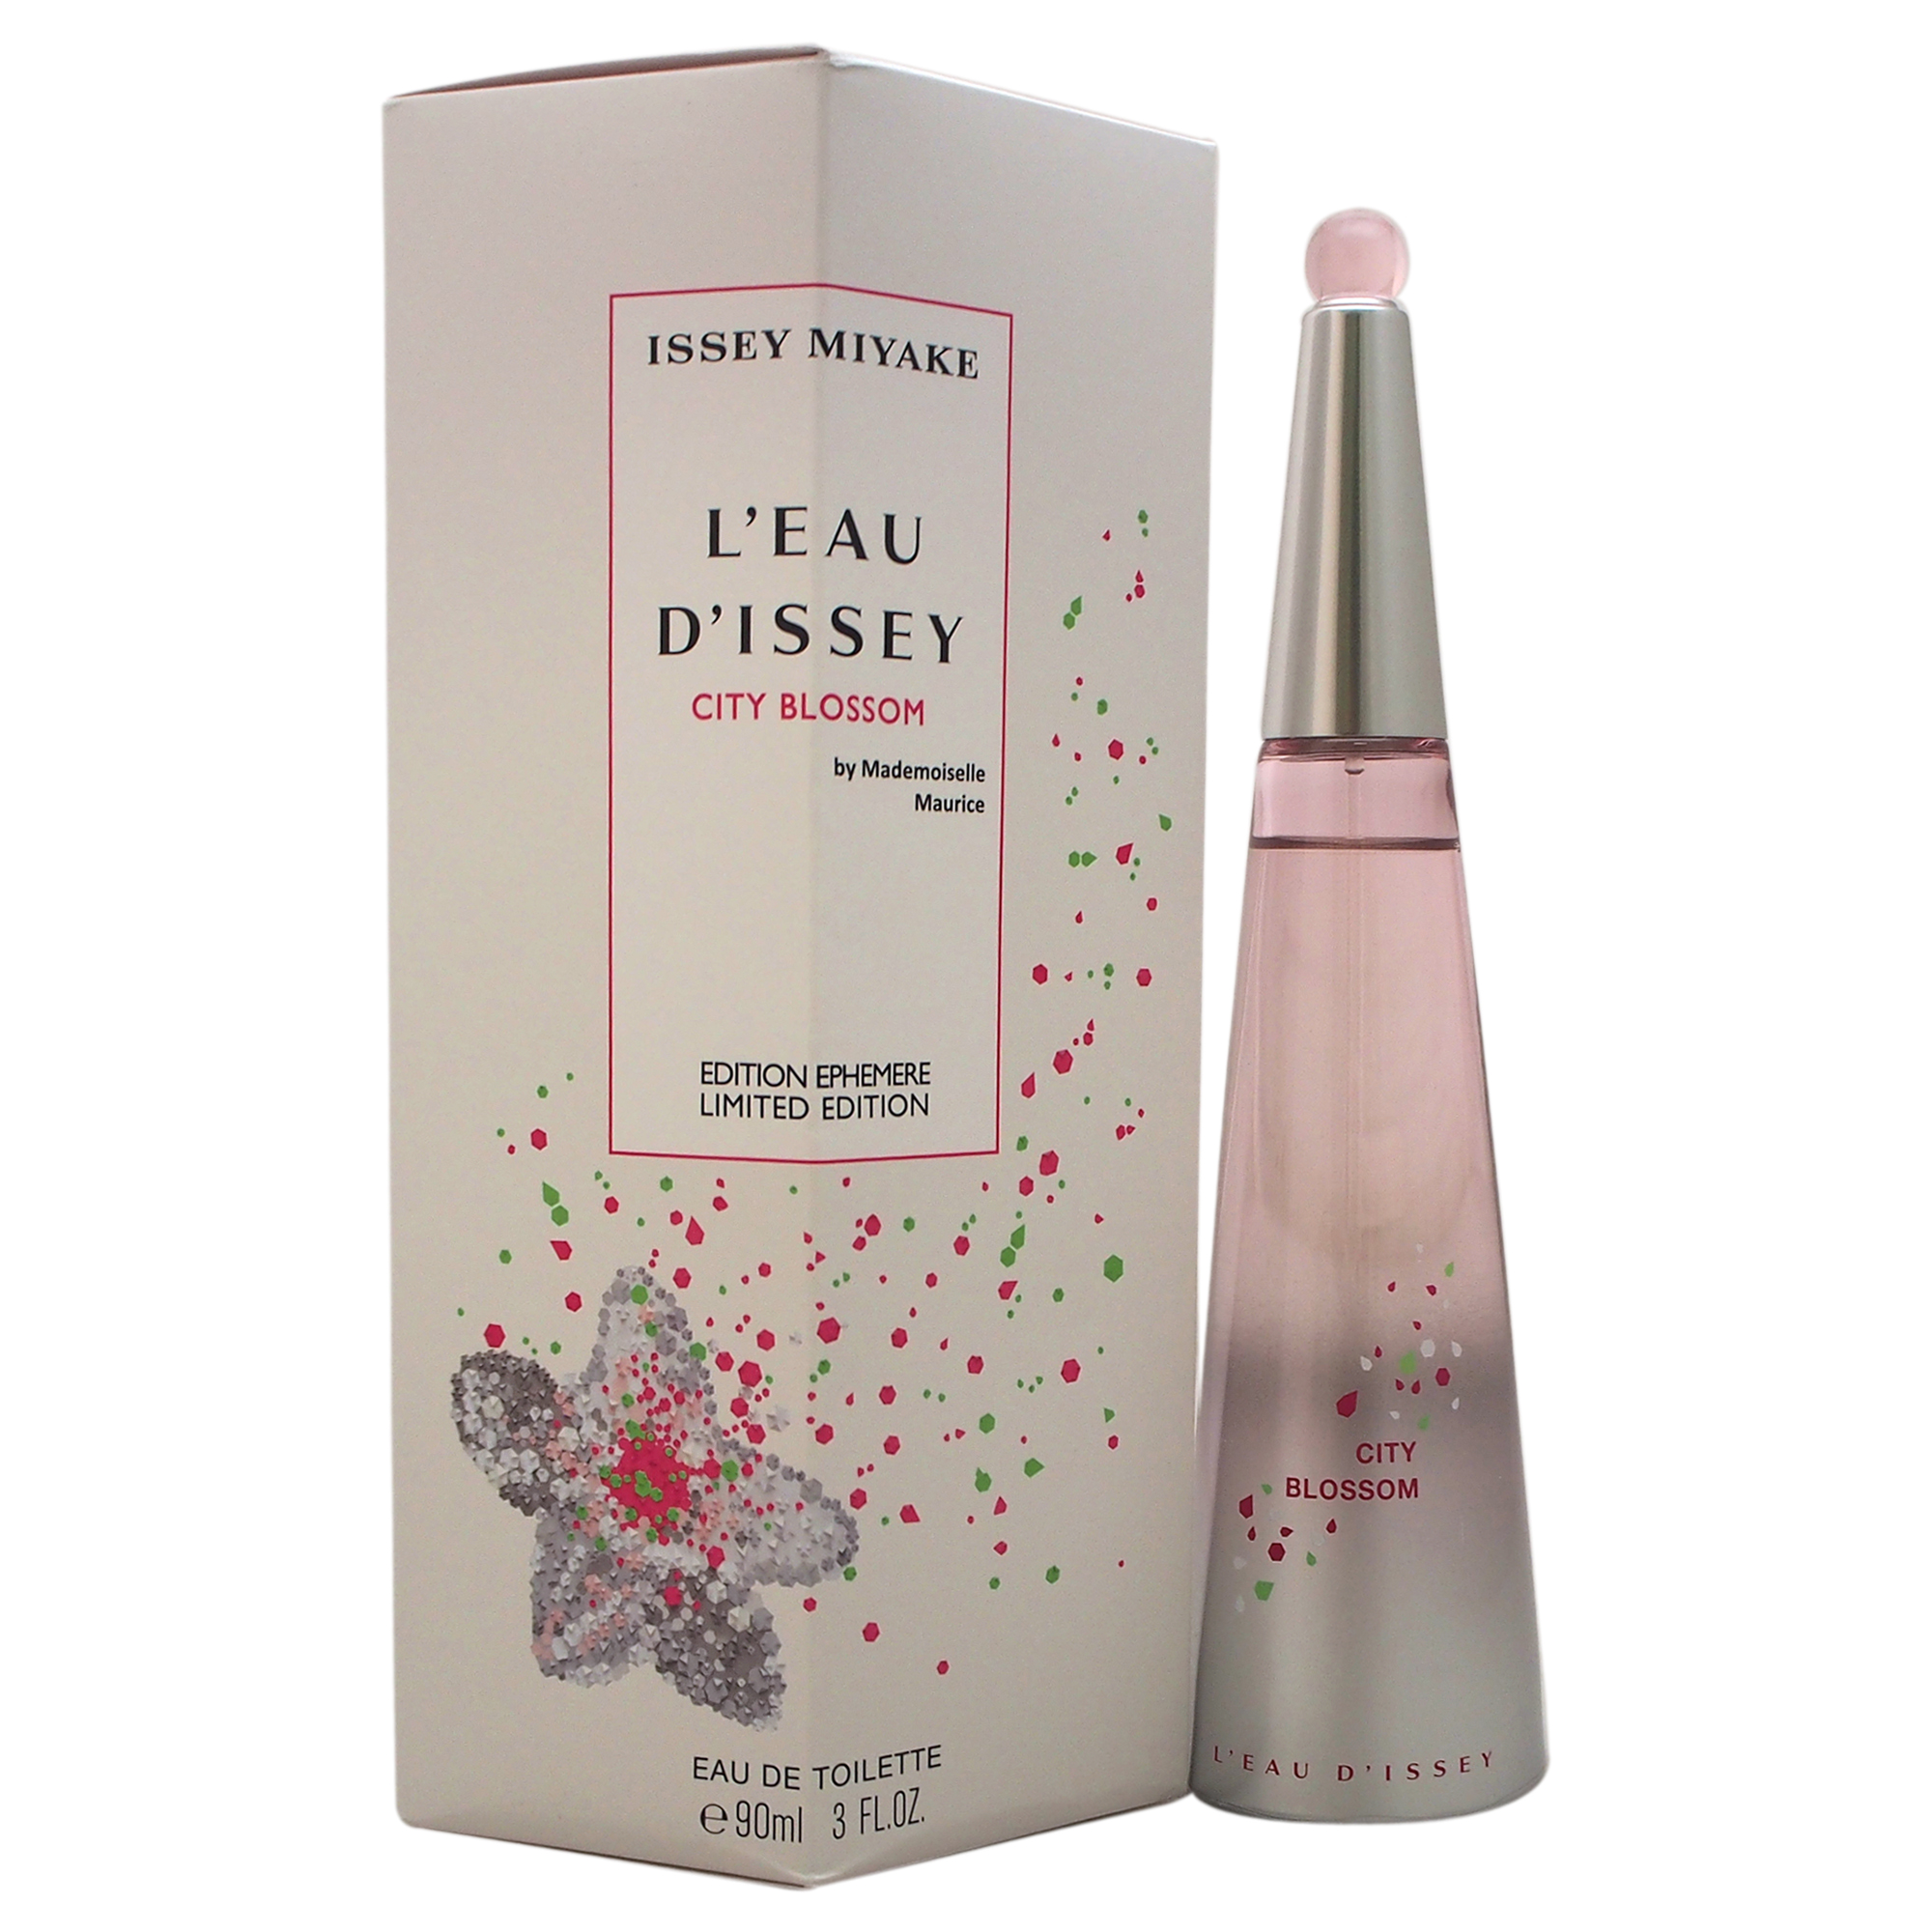 L'eau D'issey City Blossom by Issey Miyake for Women - 3 oz EDT Spray ...